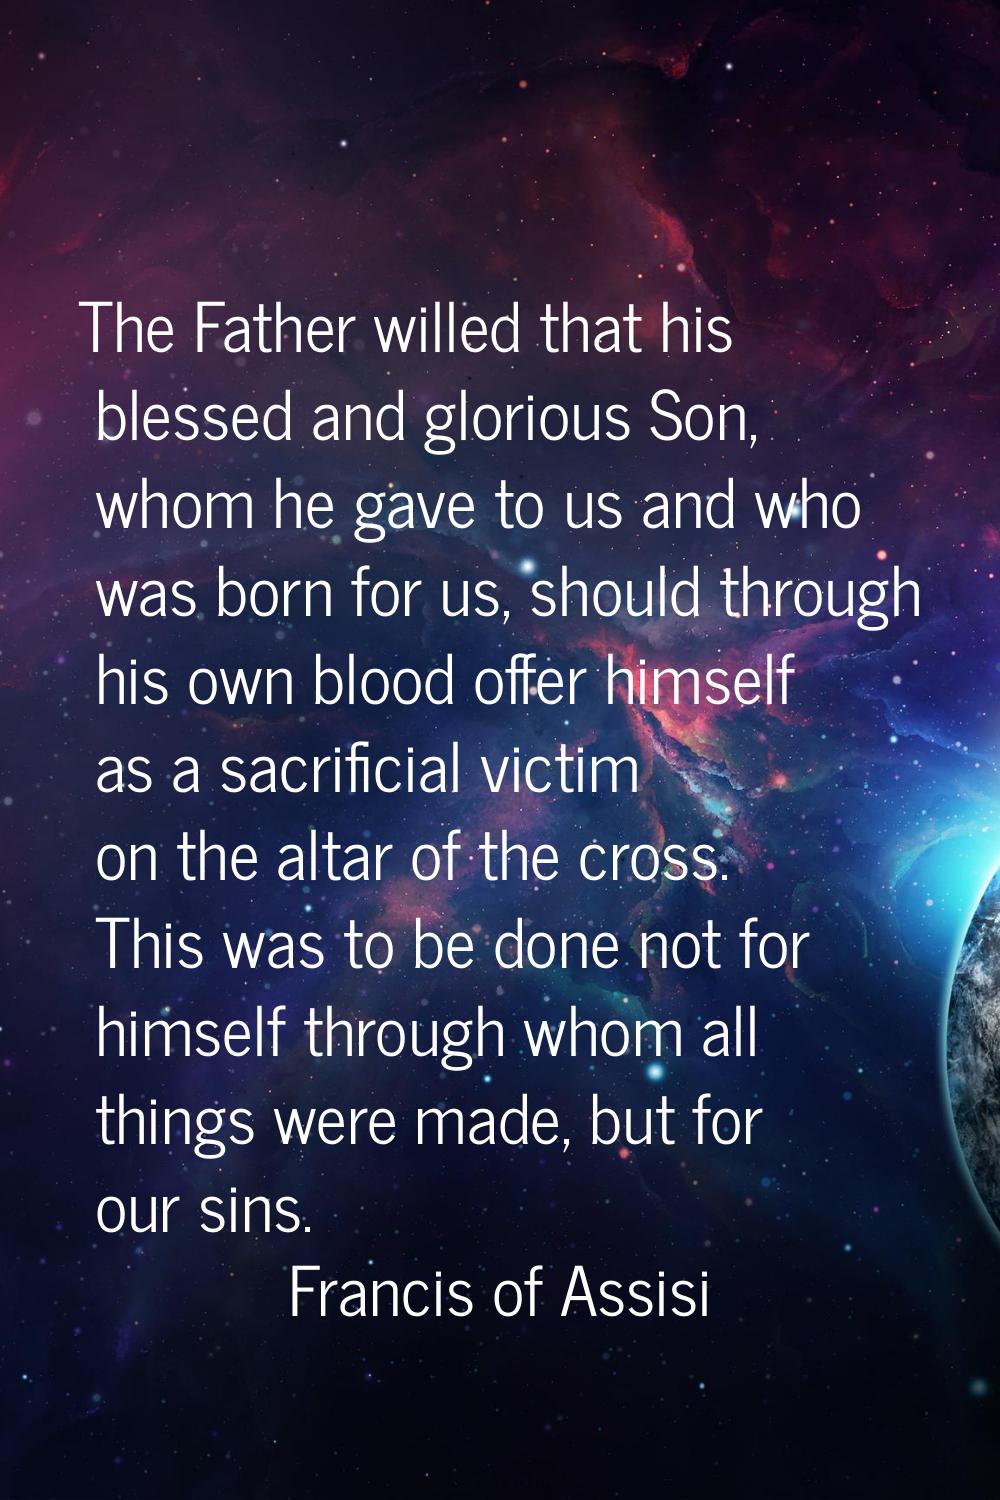 The Father willed that his blessed and glorious Son, whom he gave to us and who was born for us, sh